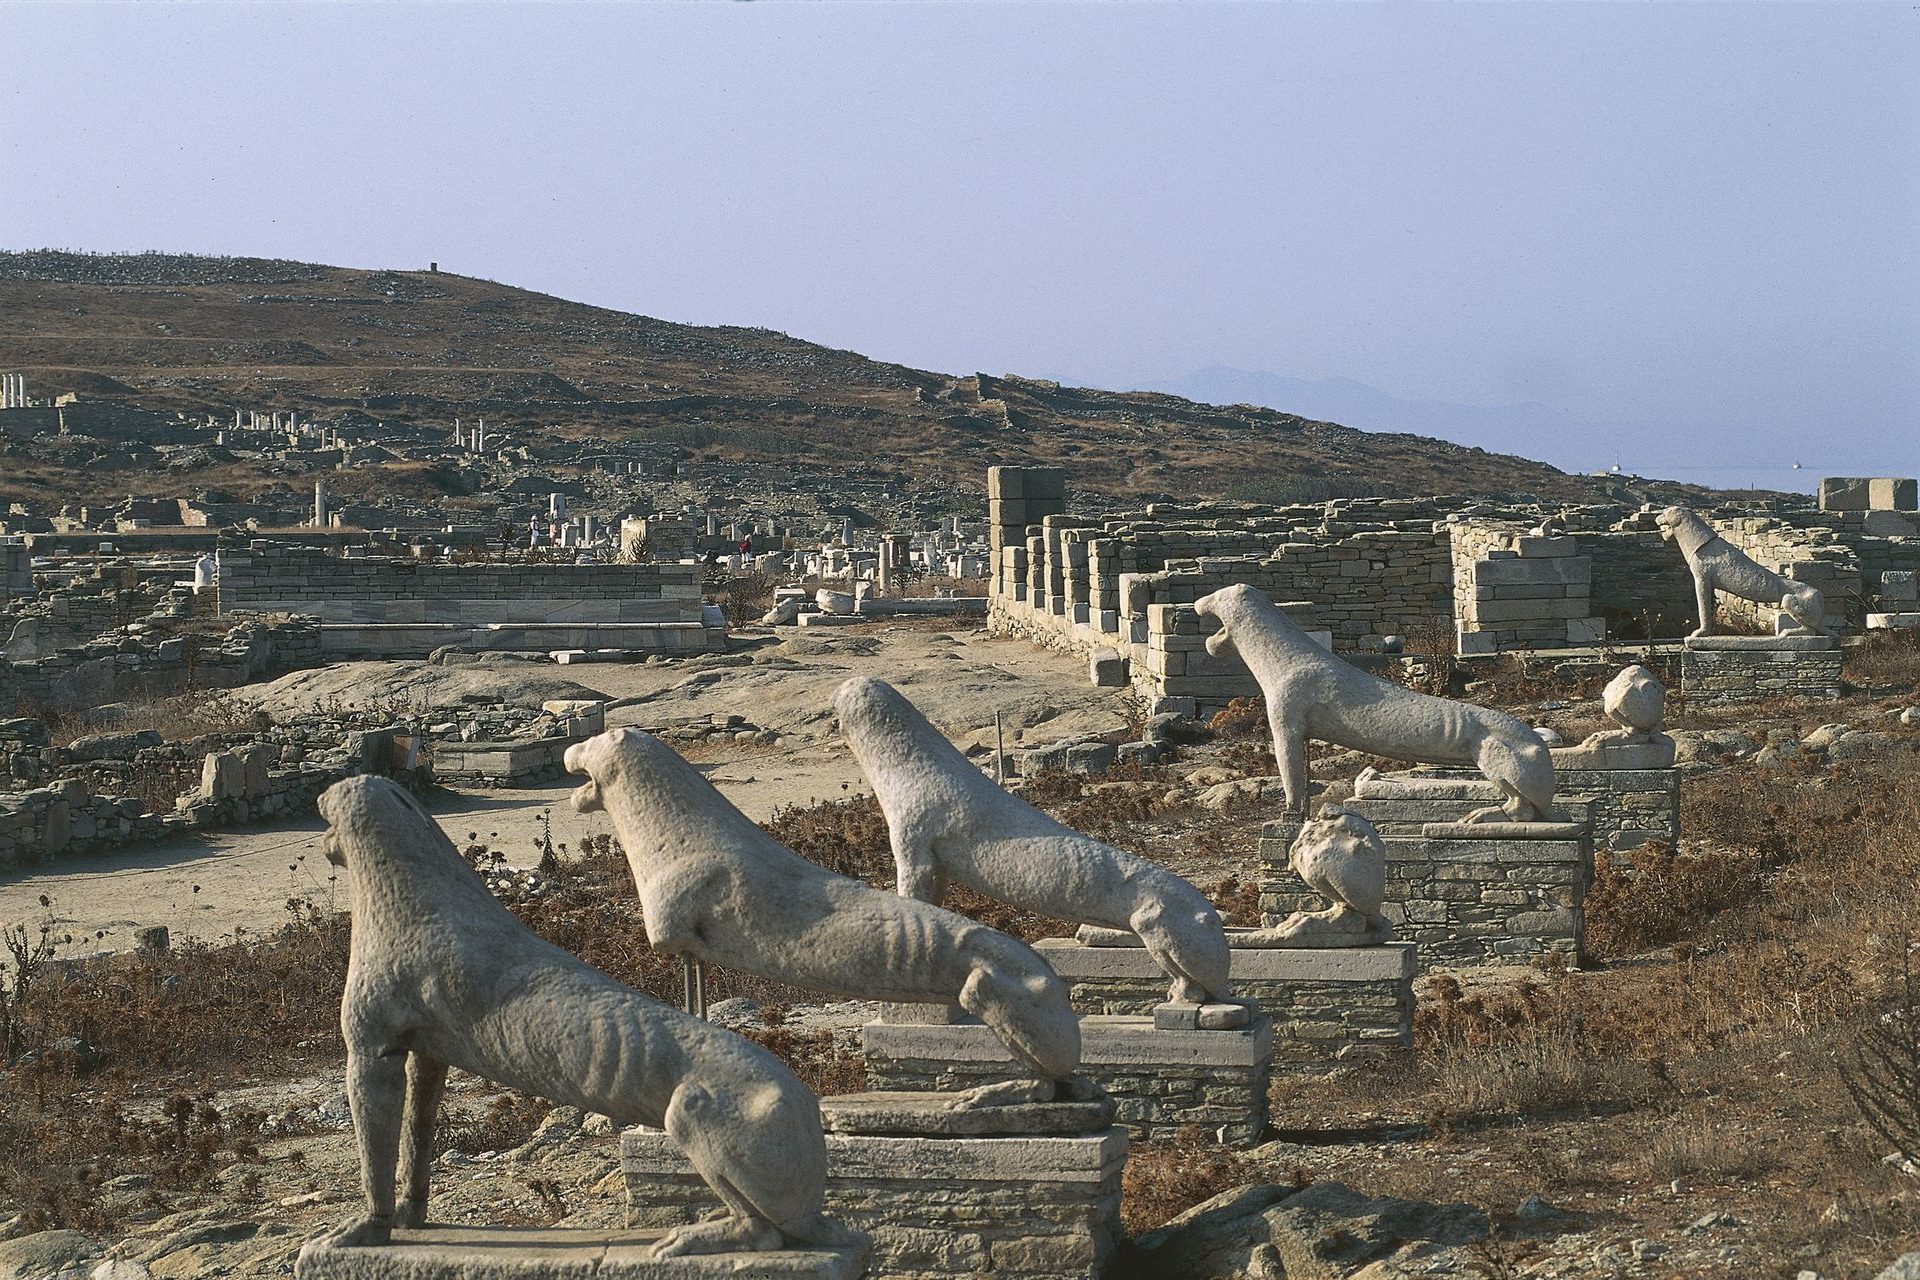 <p>For lovers of ancient sites, Delos is the place to go first among the Cyclades islands. Radiant in antiquity, the island has preserved, among other things, the sanctuary of Apollo with several temples, the Stade district, and the terrace of the foreign gods - a must-see!</p>